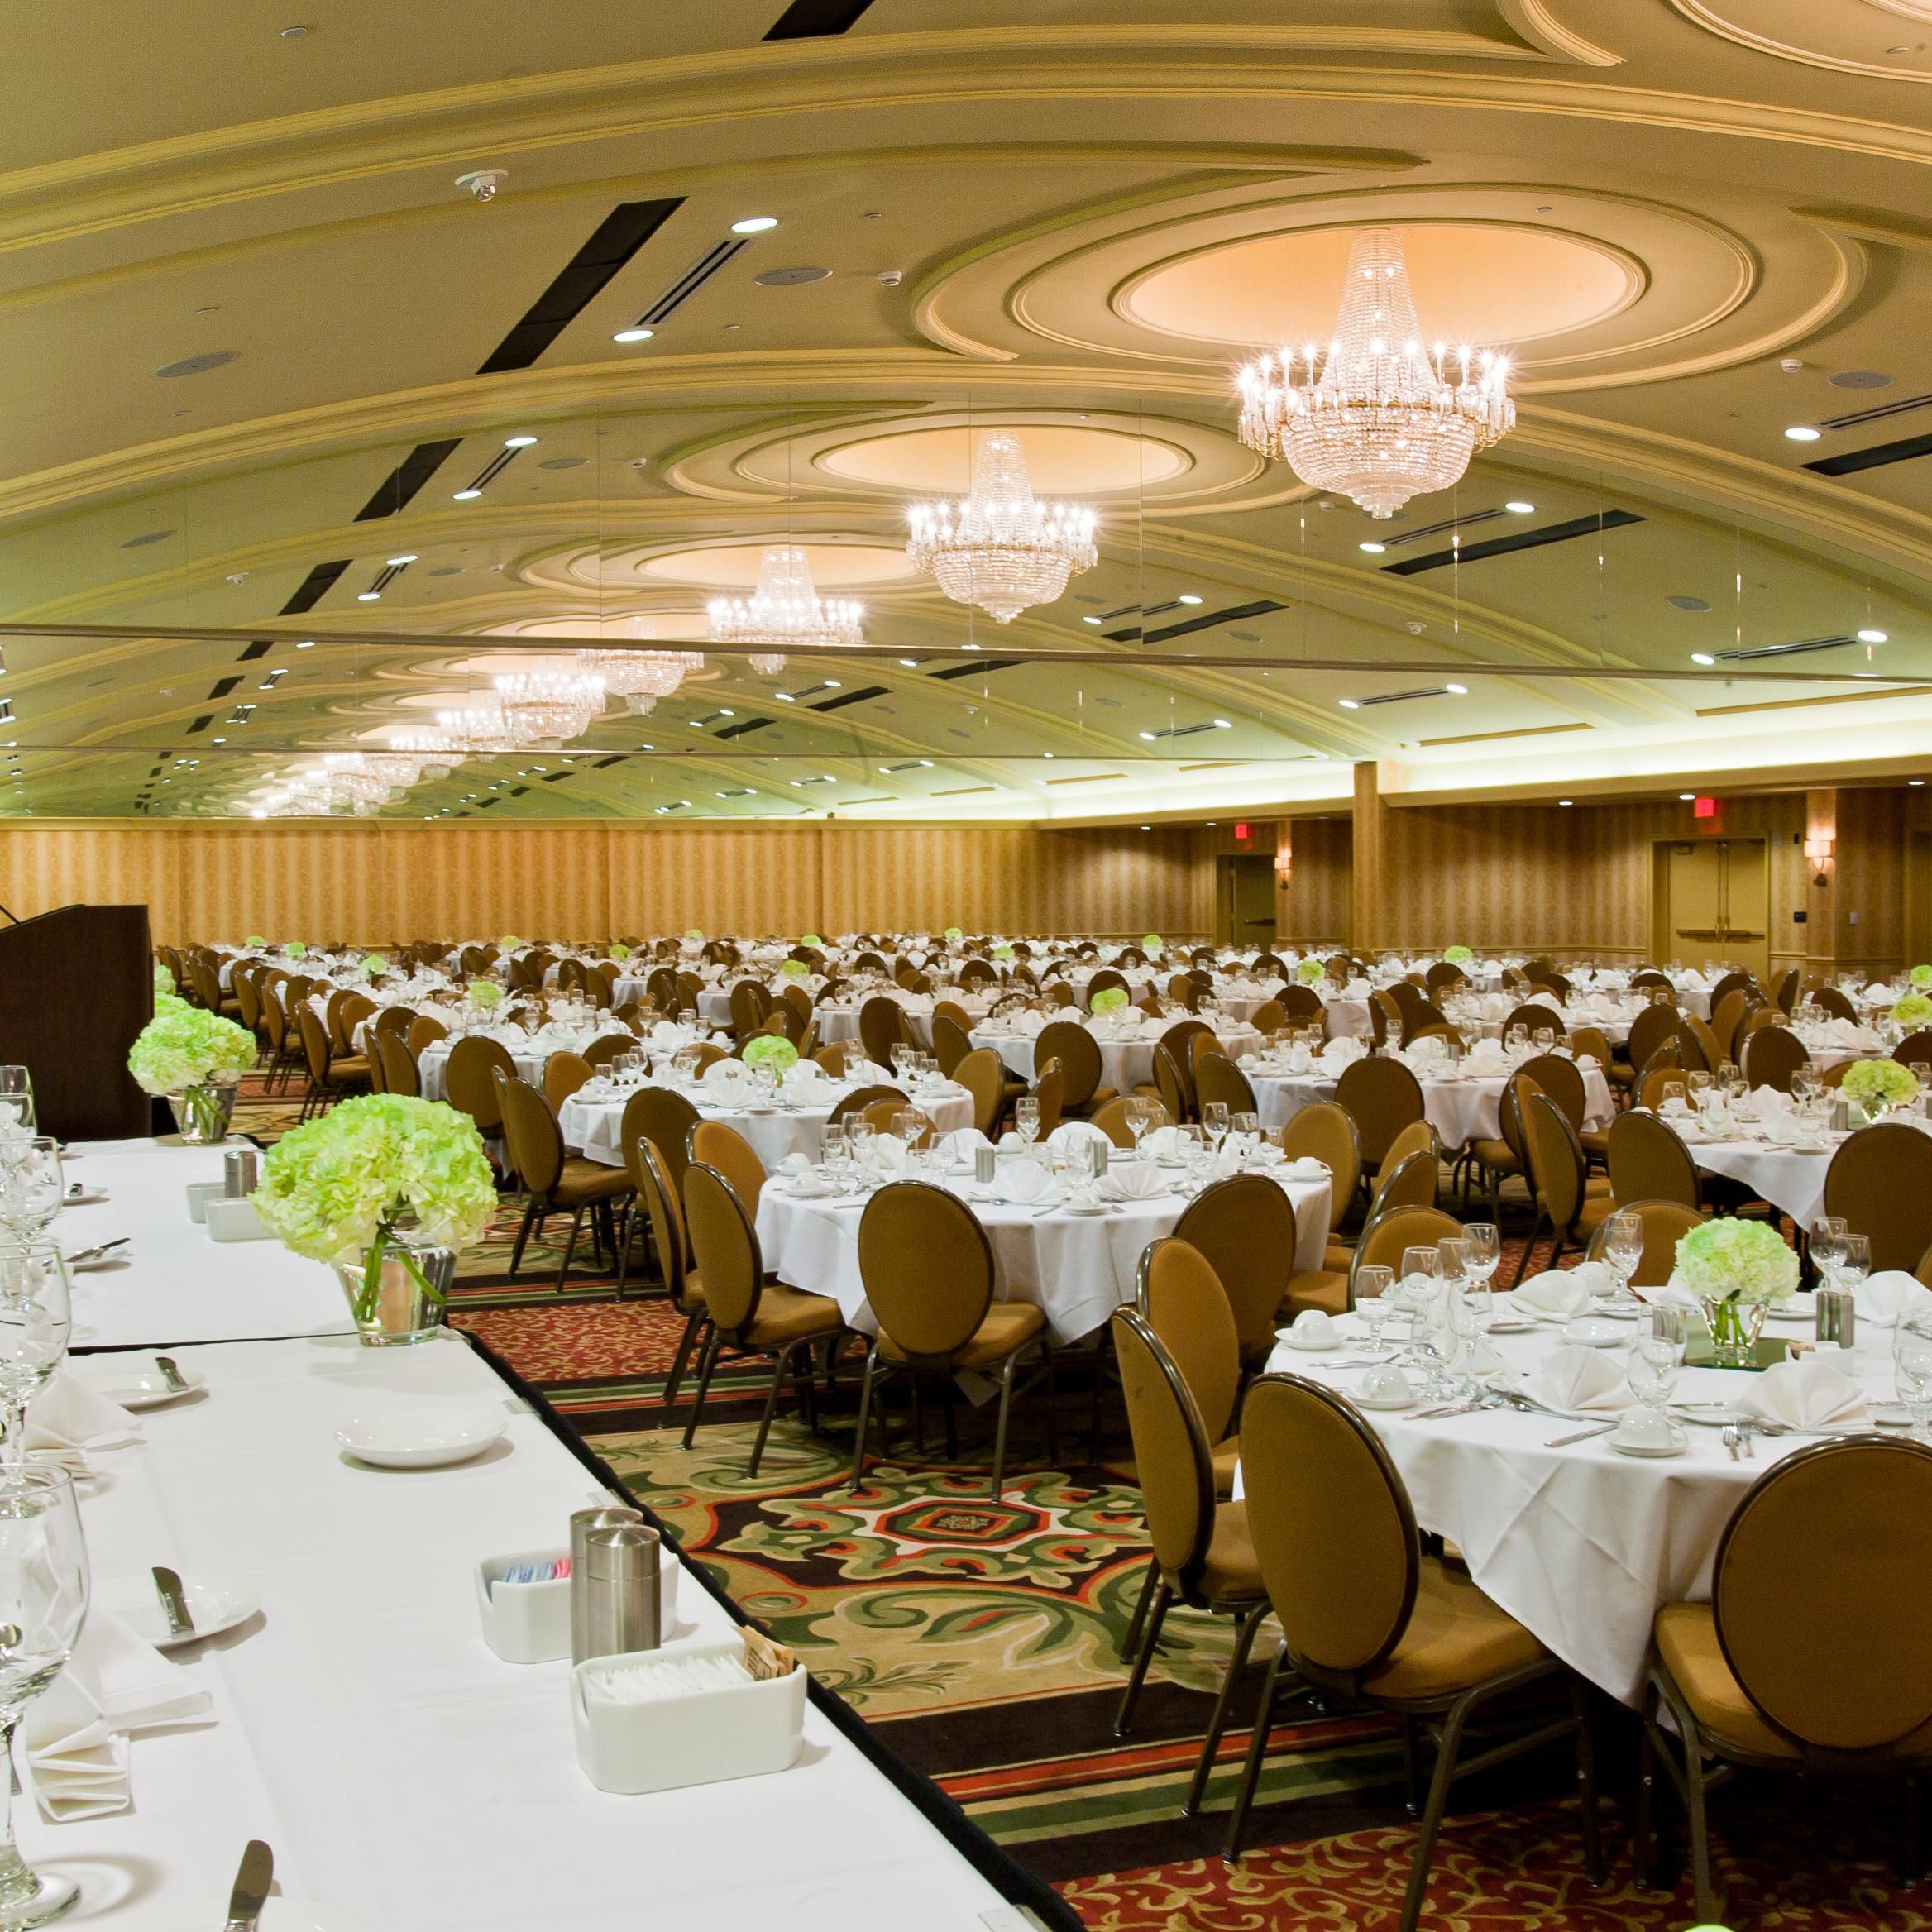 One of our largest meeting spaces, Crowne Ballroom.